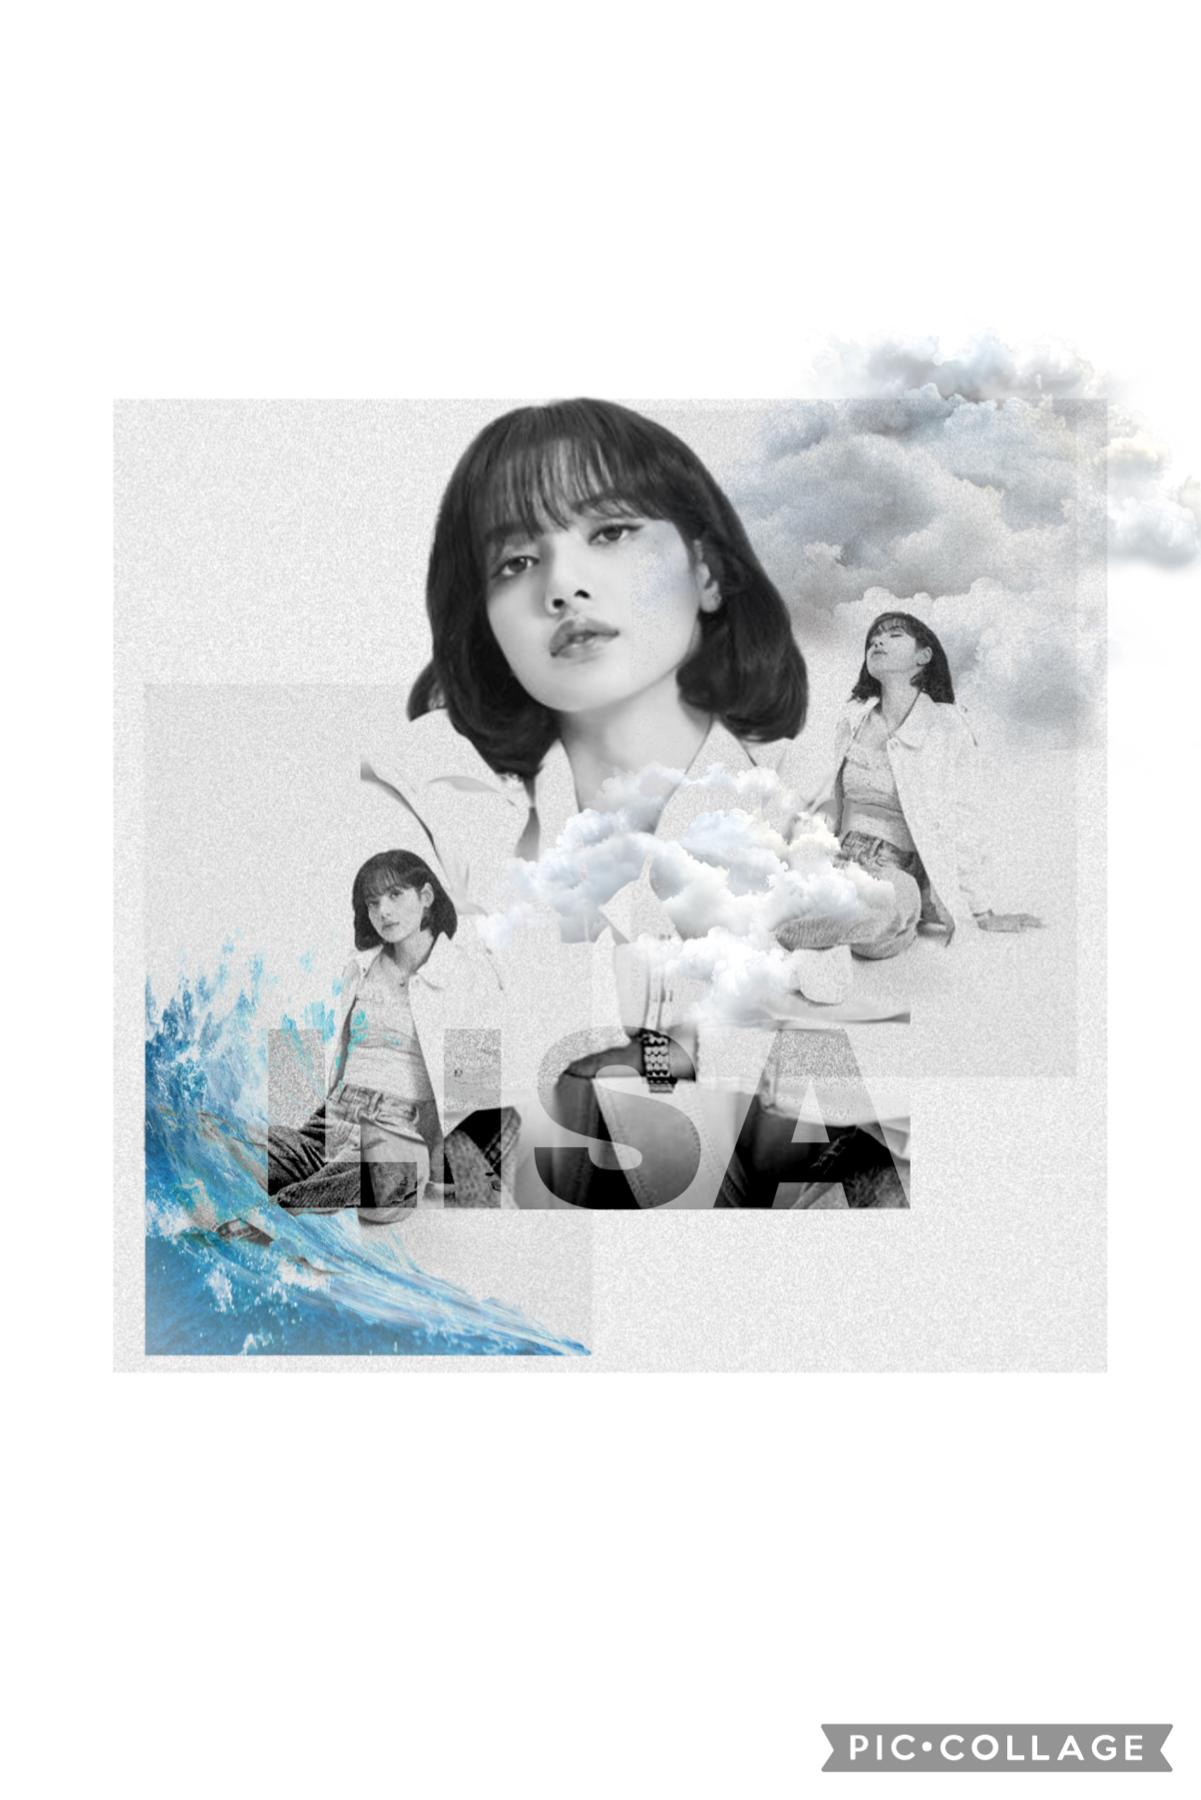 ☁️
I tried to do something new and this edit on PicsArt so it looks kinda different than my other edits 